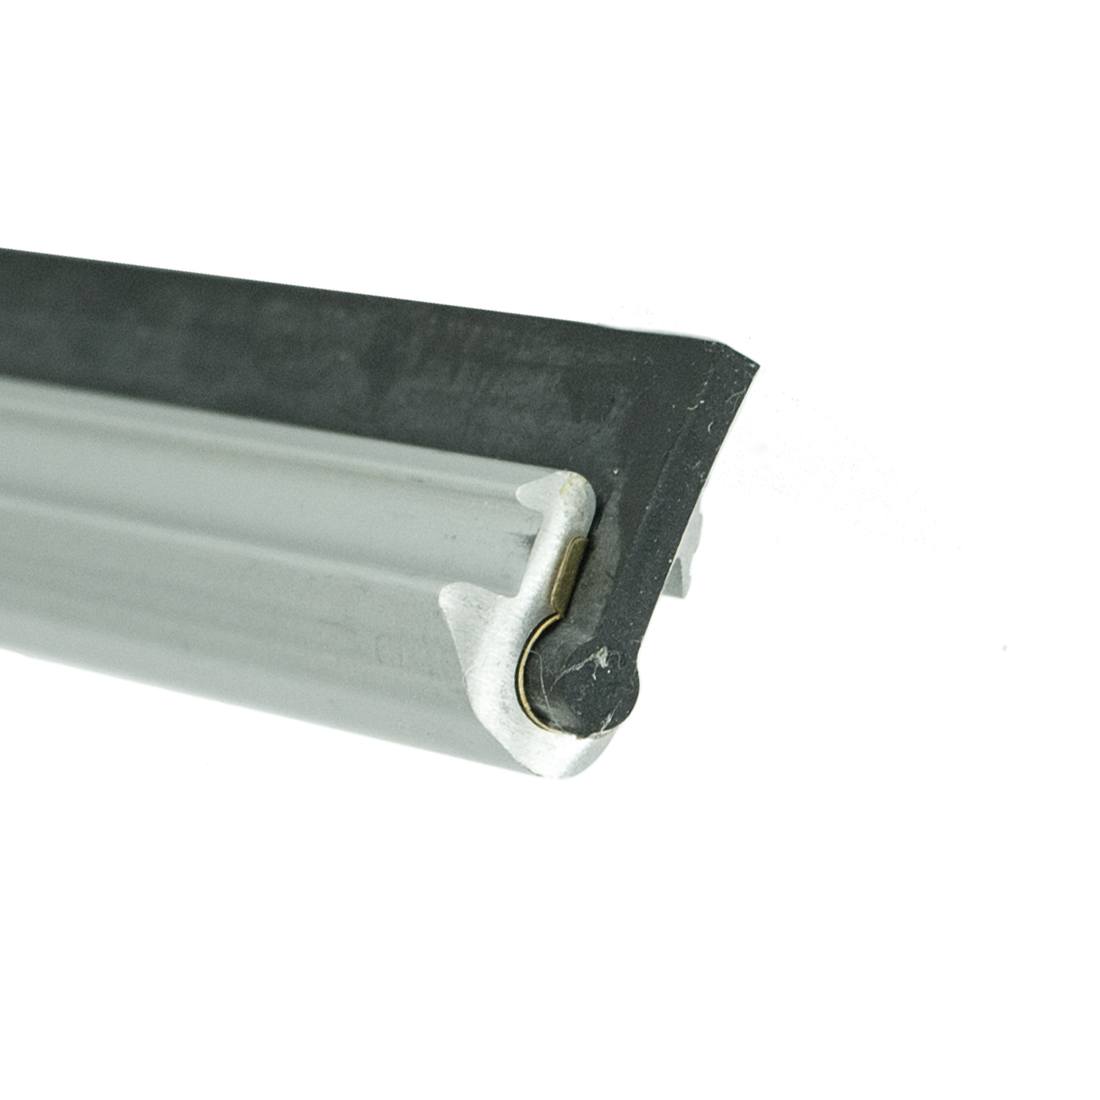 Pulex Alumax Squeegee Channel Rubber View